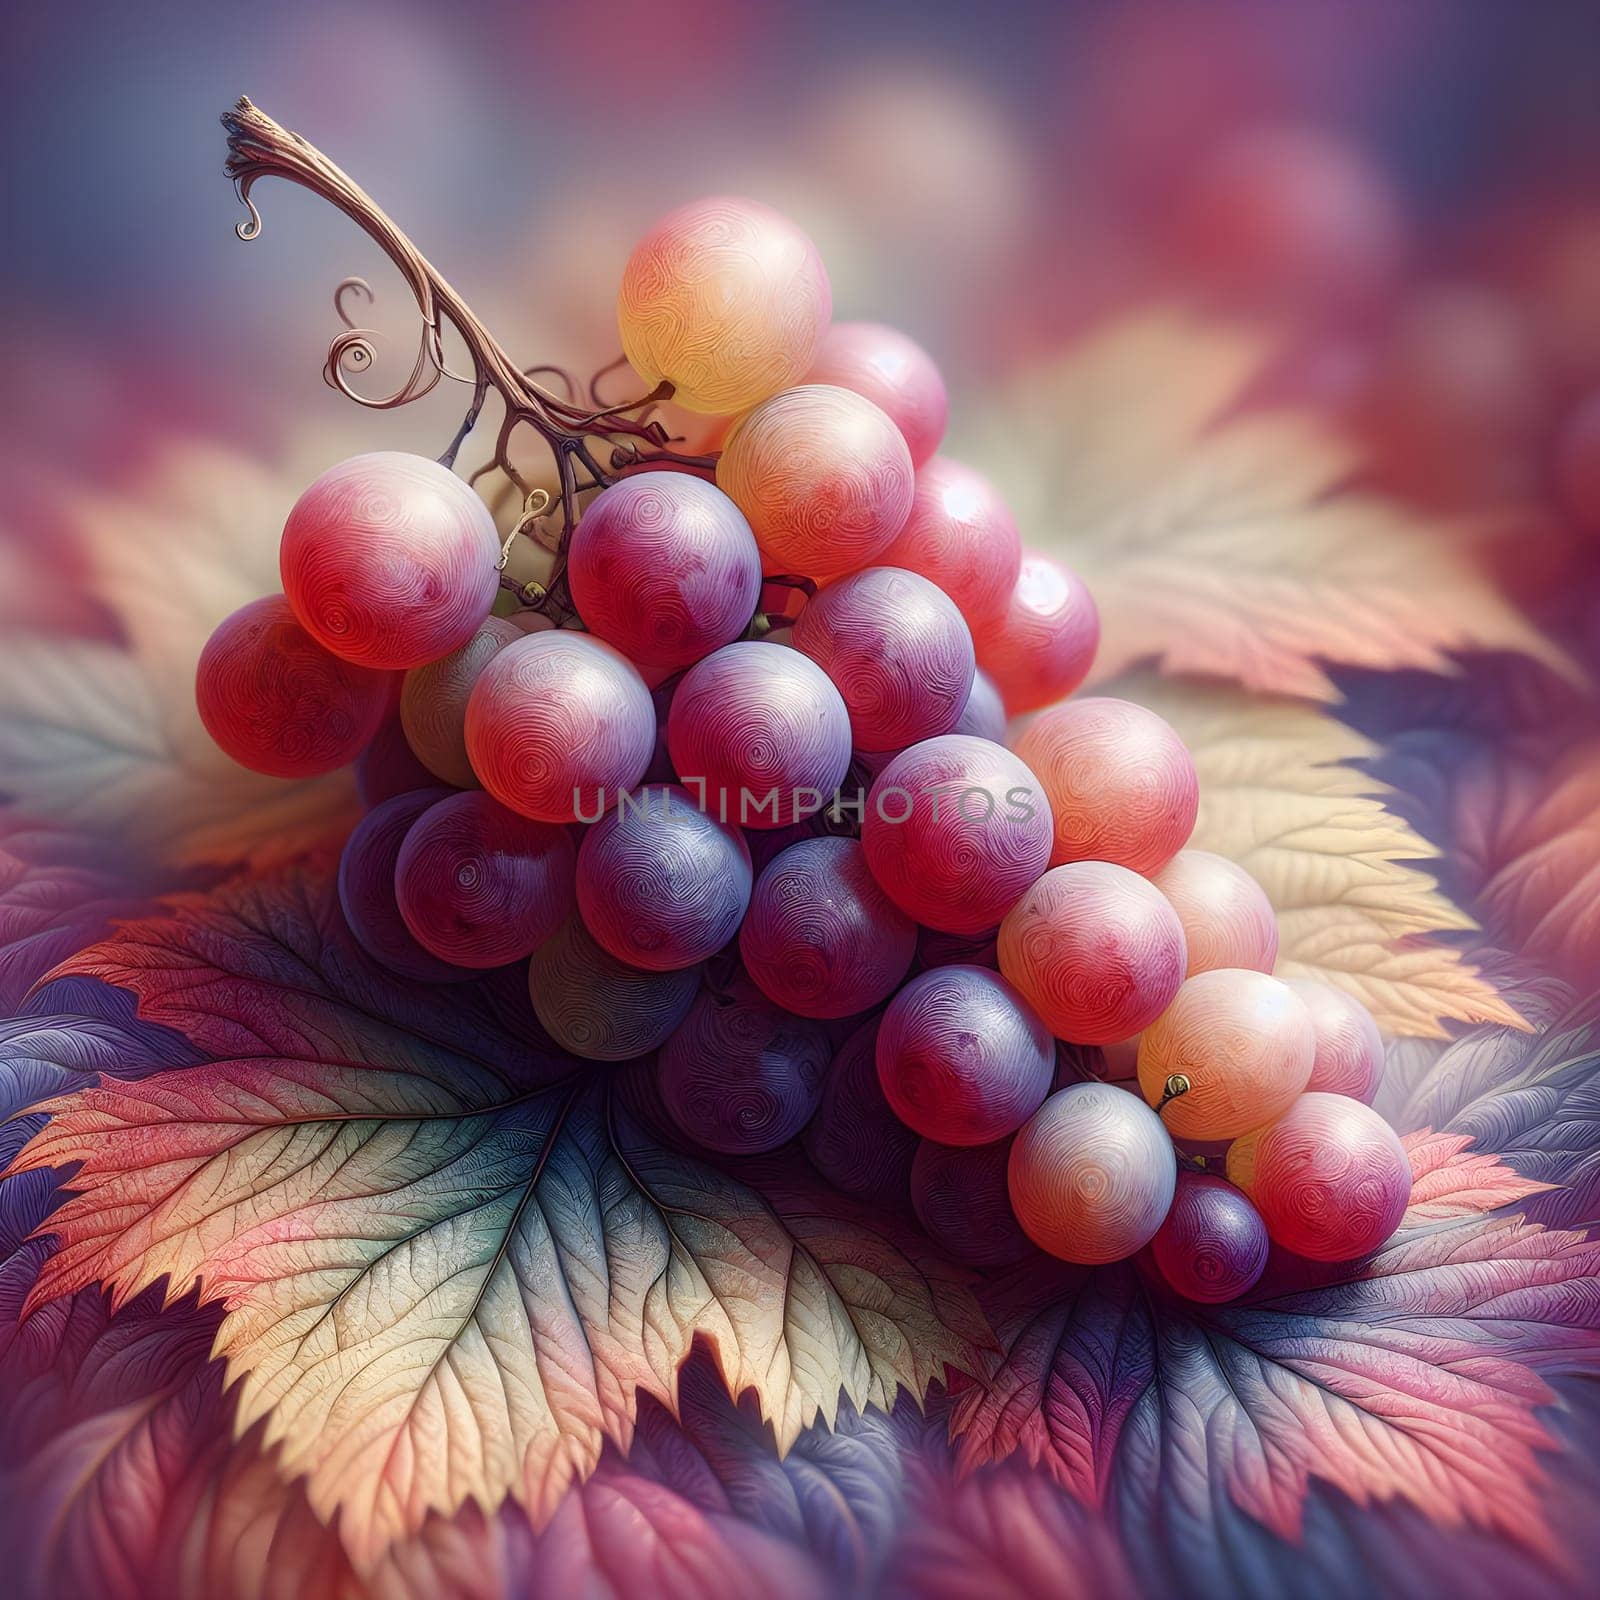 A bunch of grapes, neatly arranged and isolated on a white background by Designlab